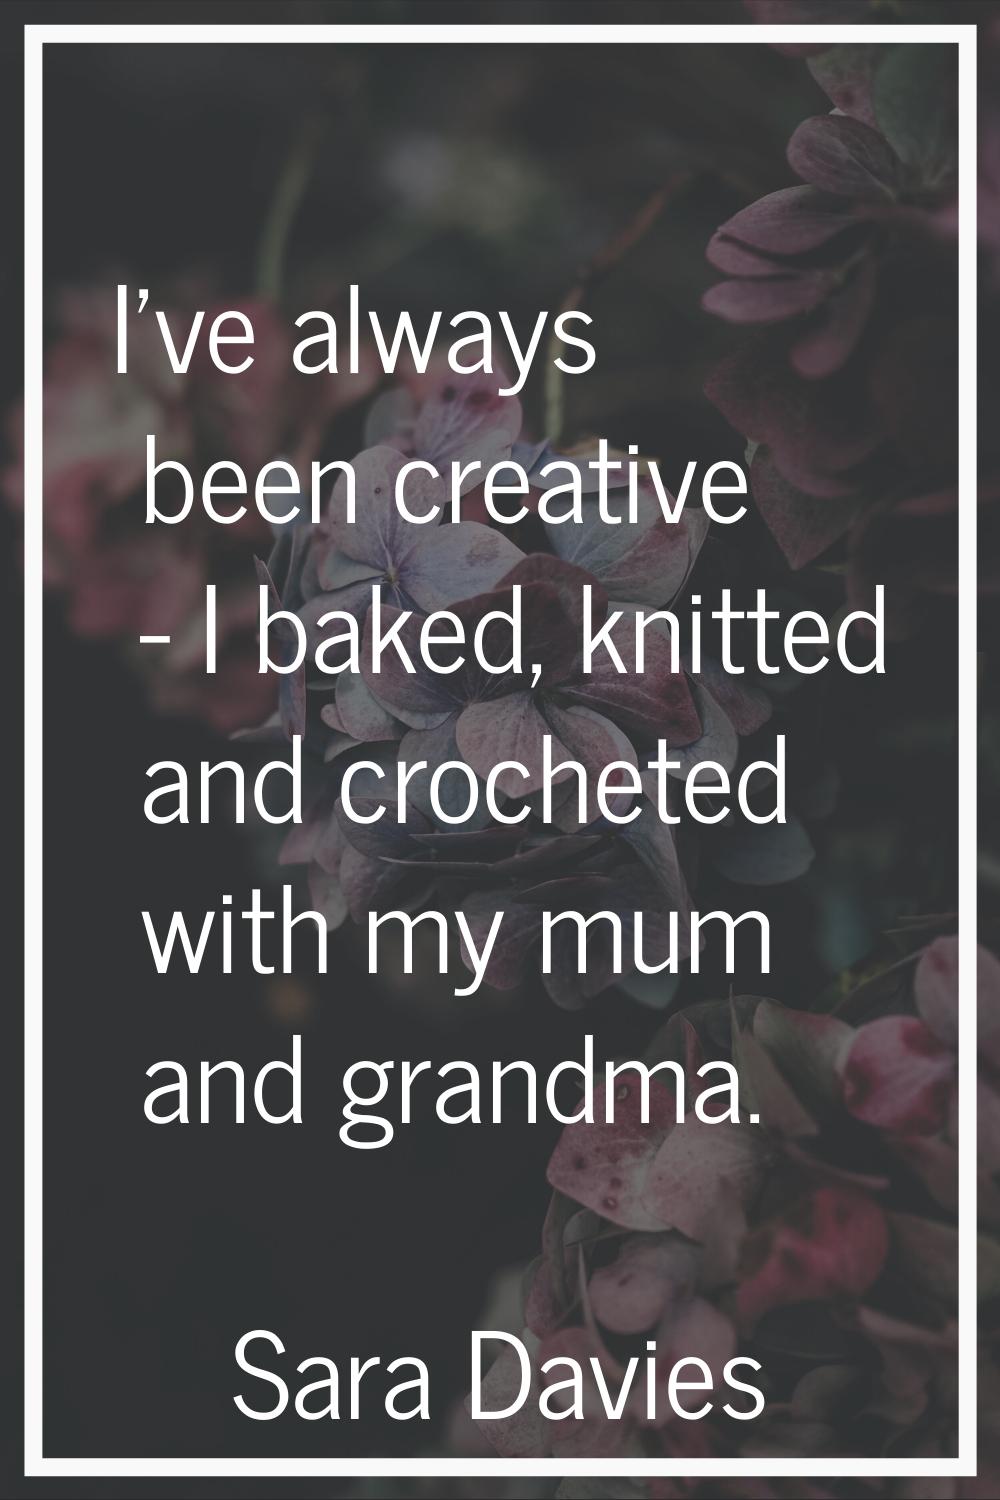 I've always been creative - I baked, knitted and crocheted with my mum and grandma.